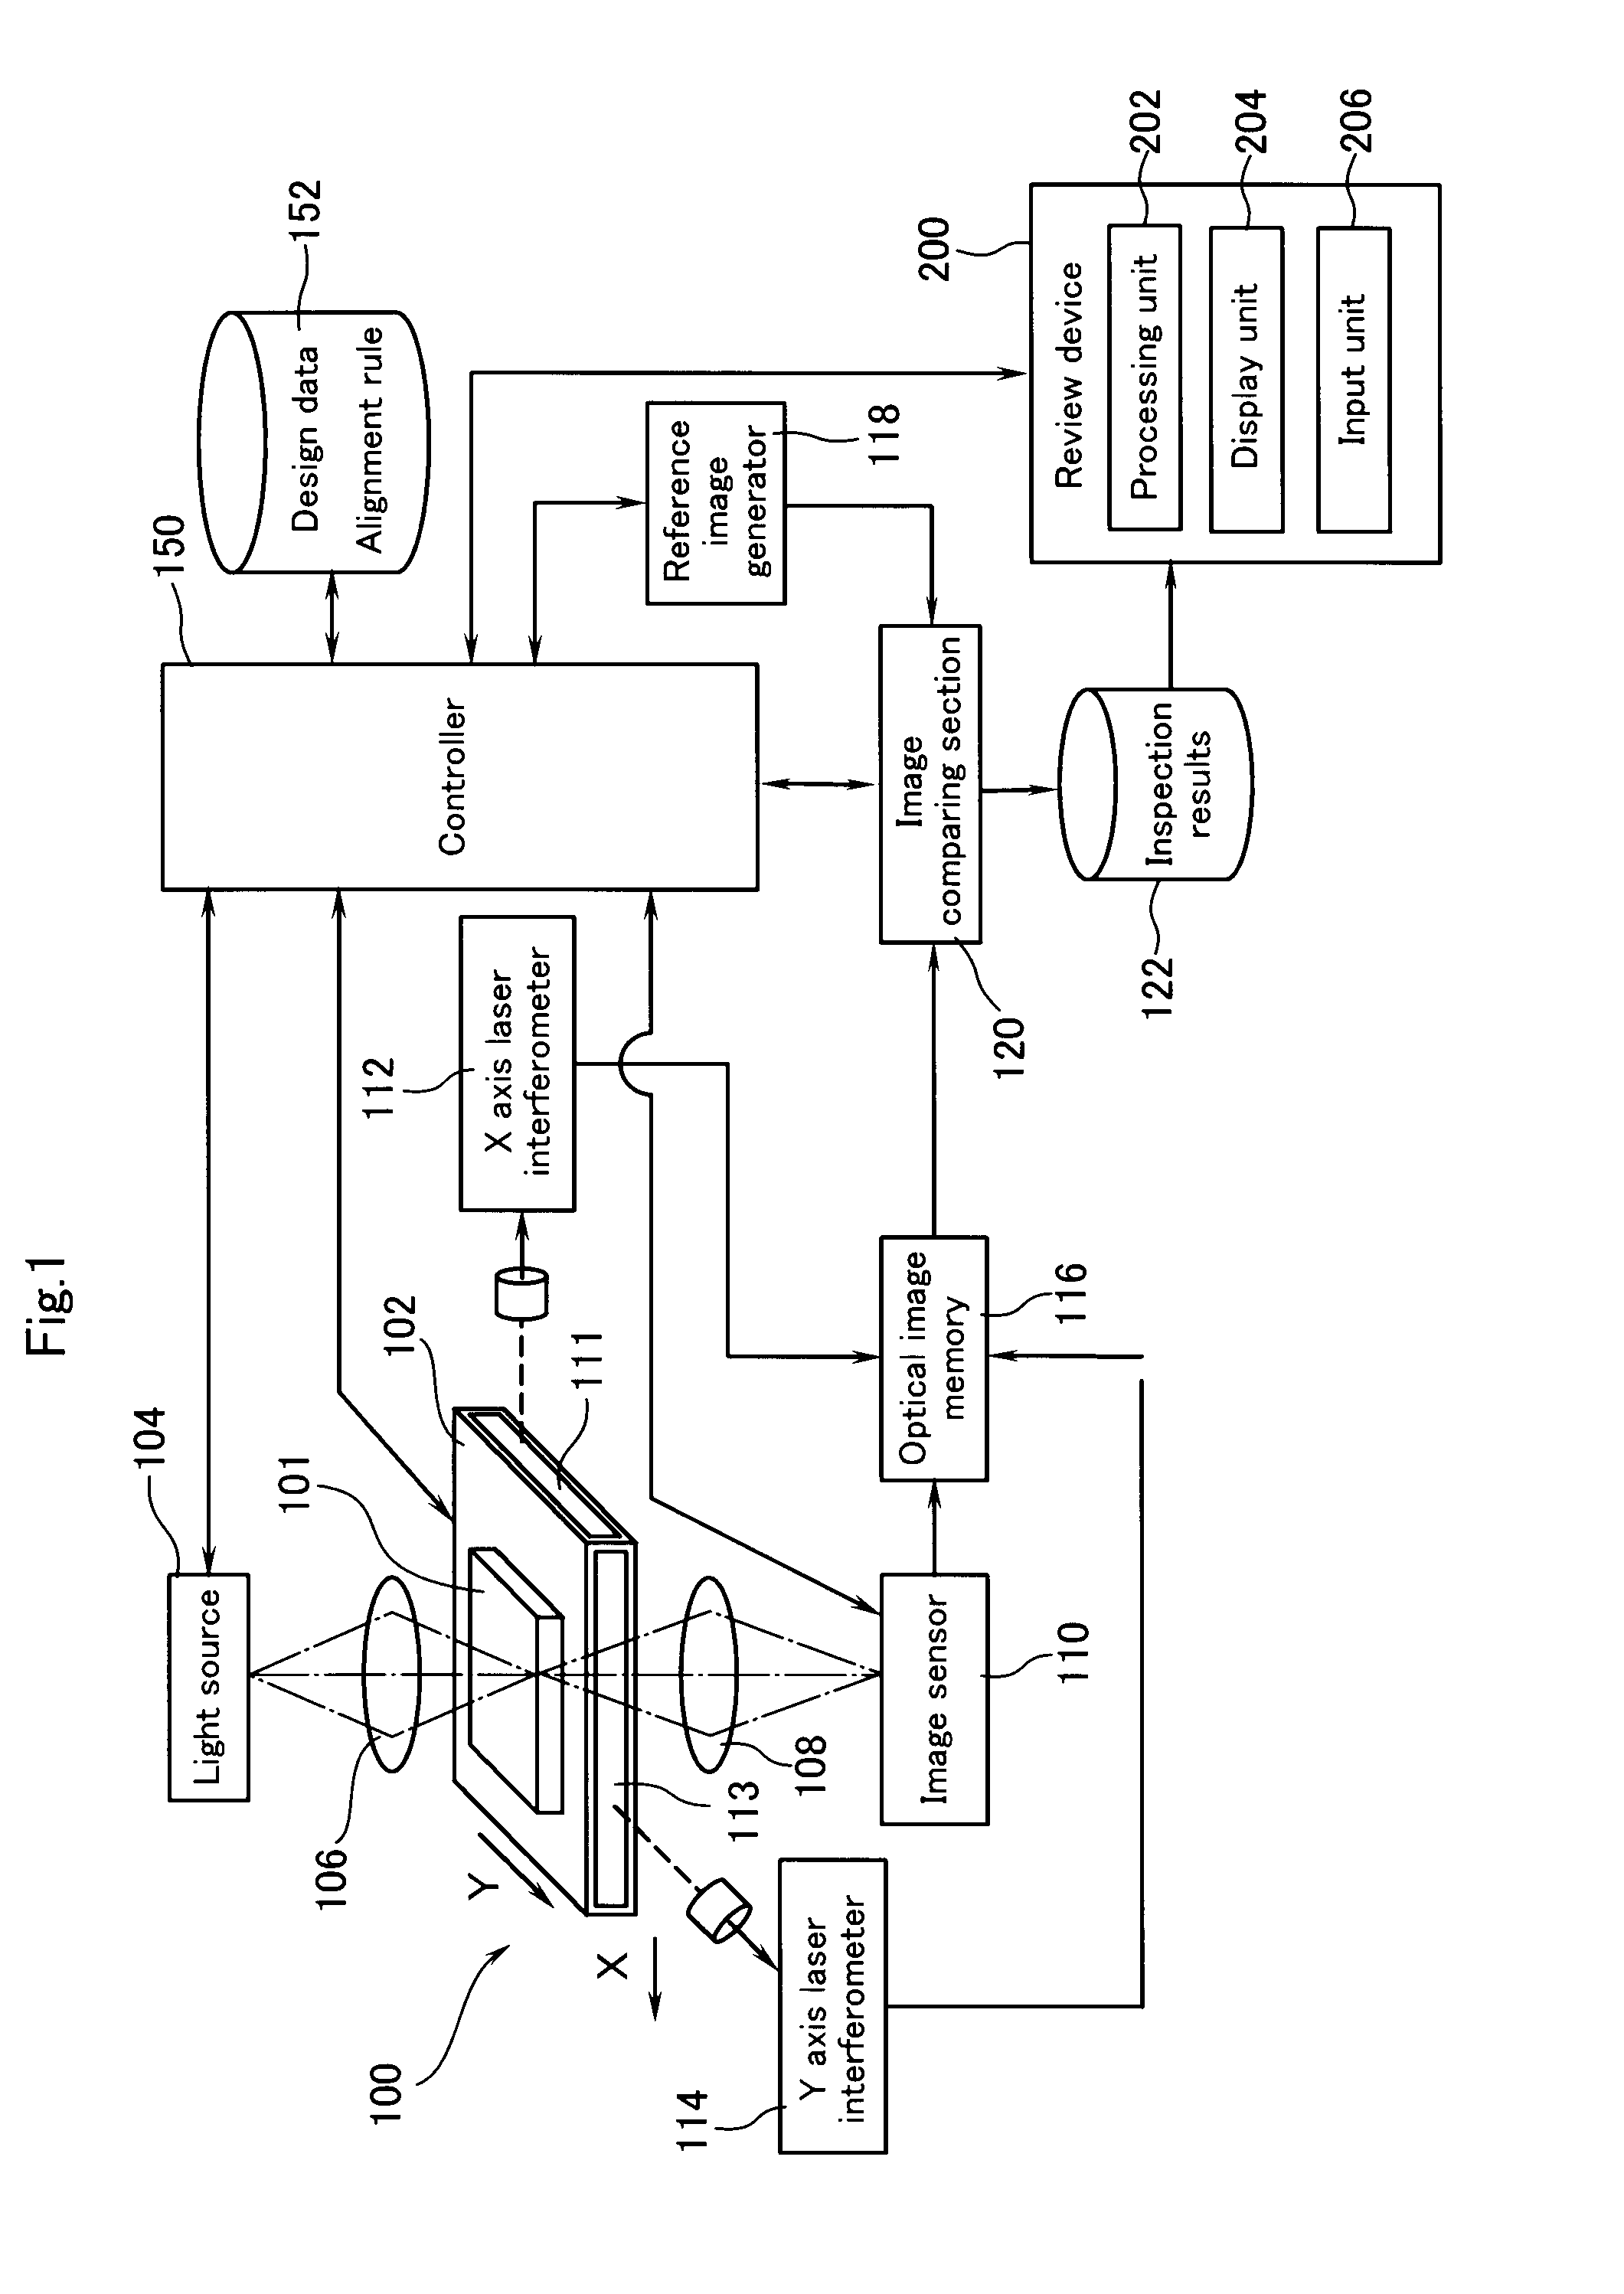 Method and apparatus for reviewing defects on mask